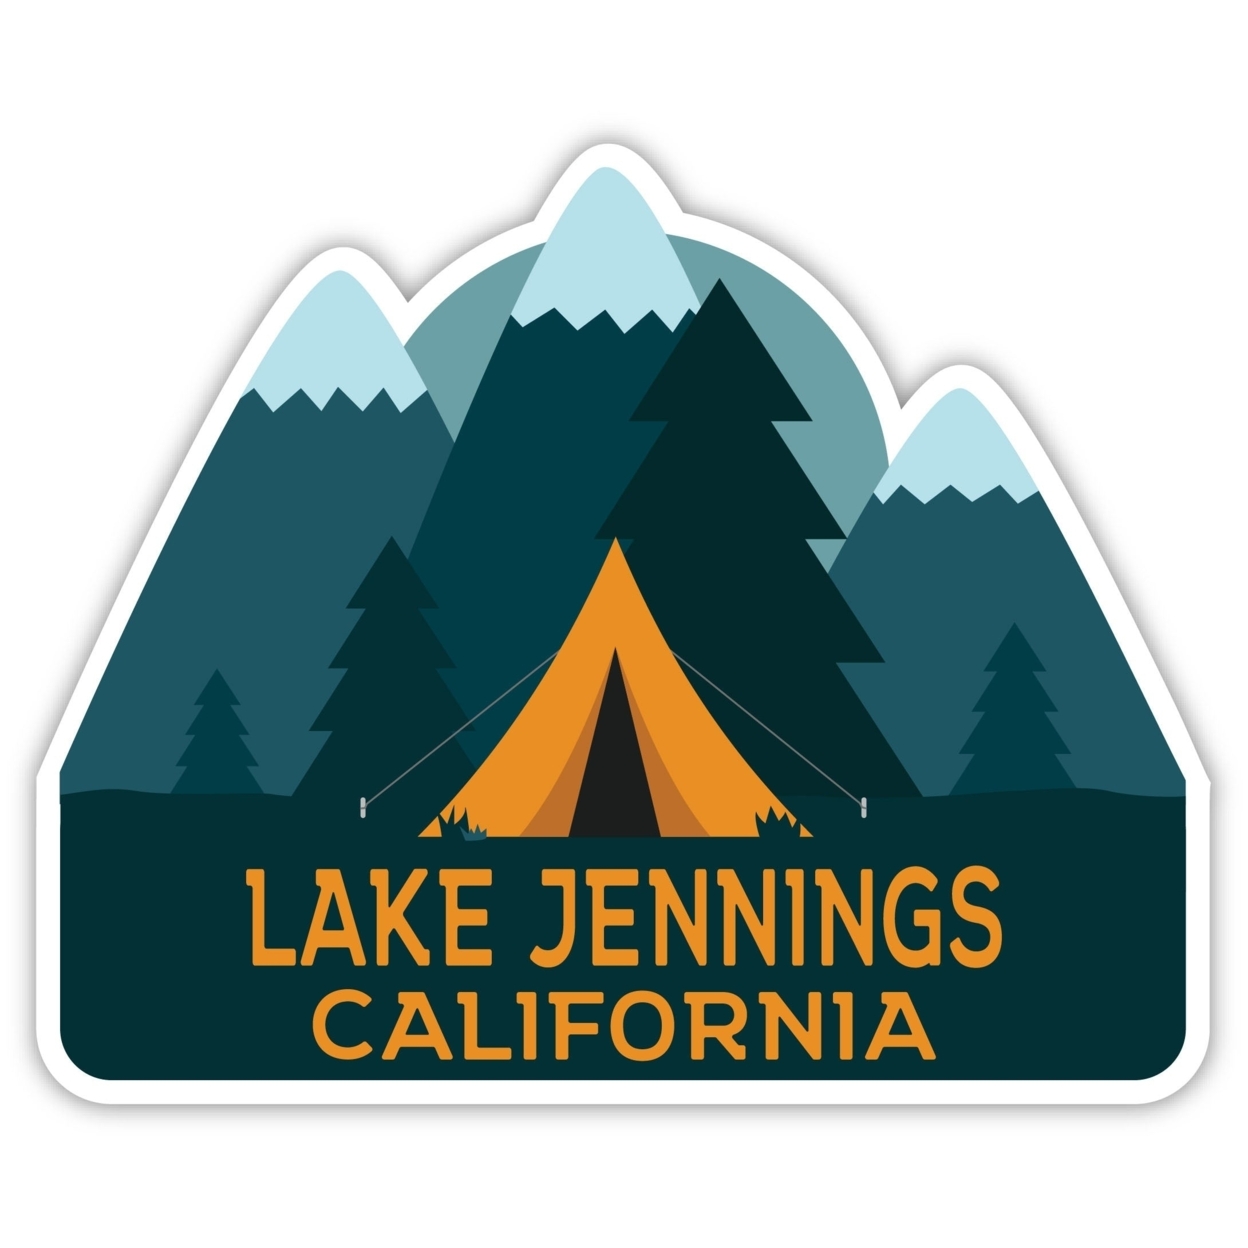 Lake Jennings California Souvenir Decorative Stickers (Choose Theme And Size) - 4-Inch, Camp Life